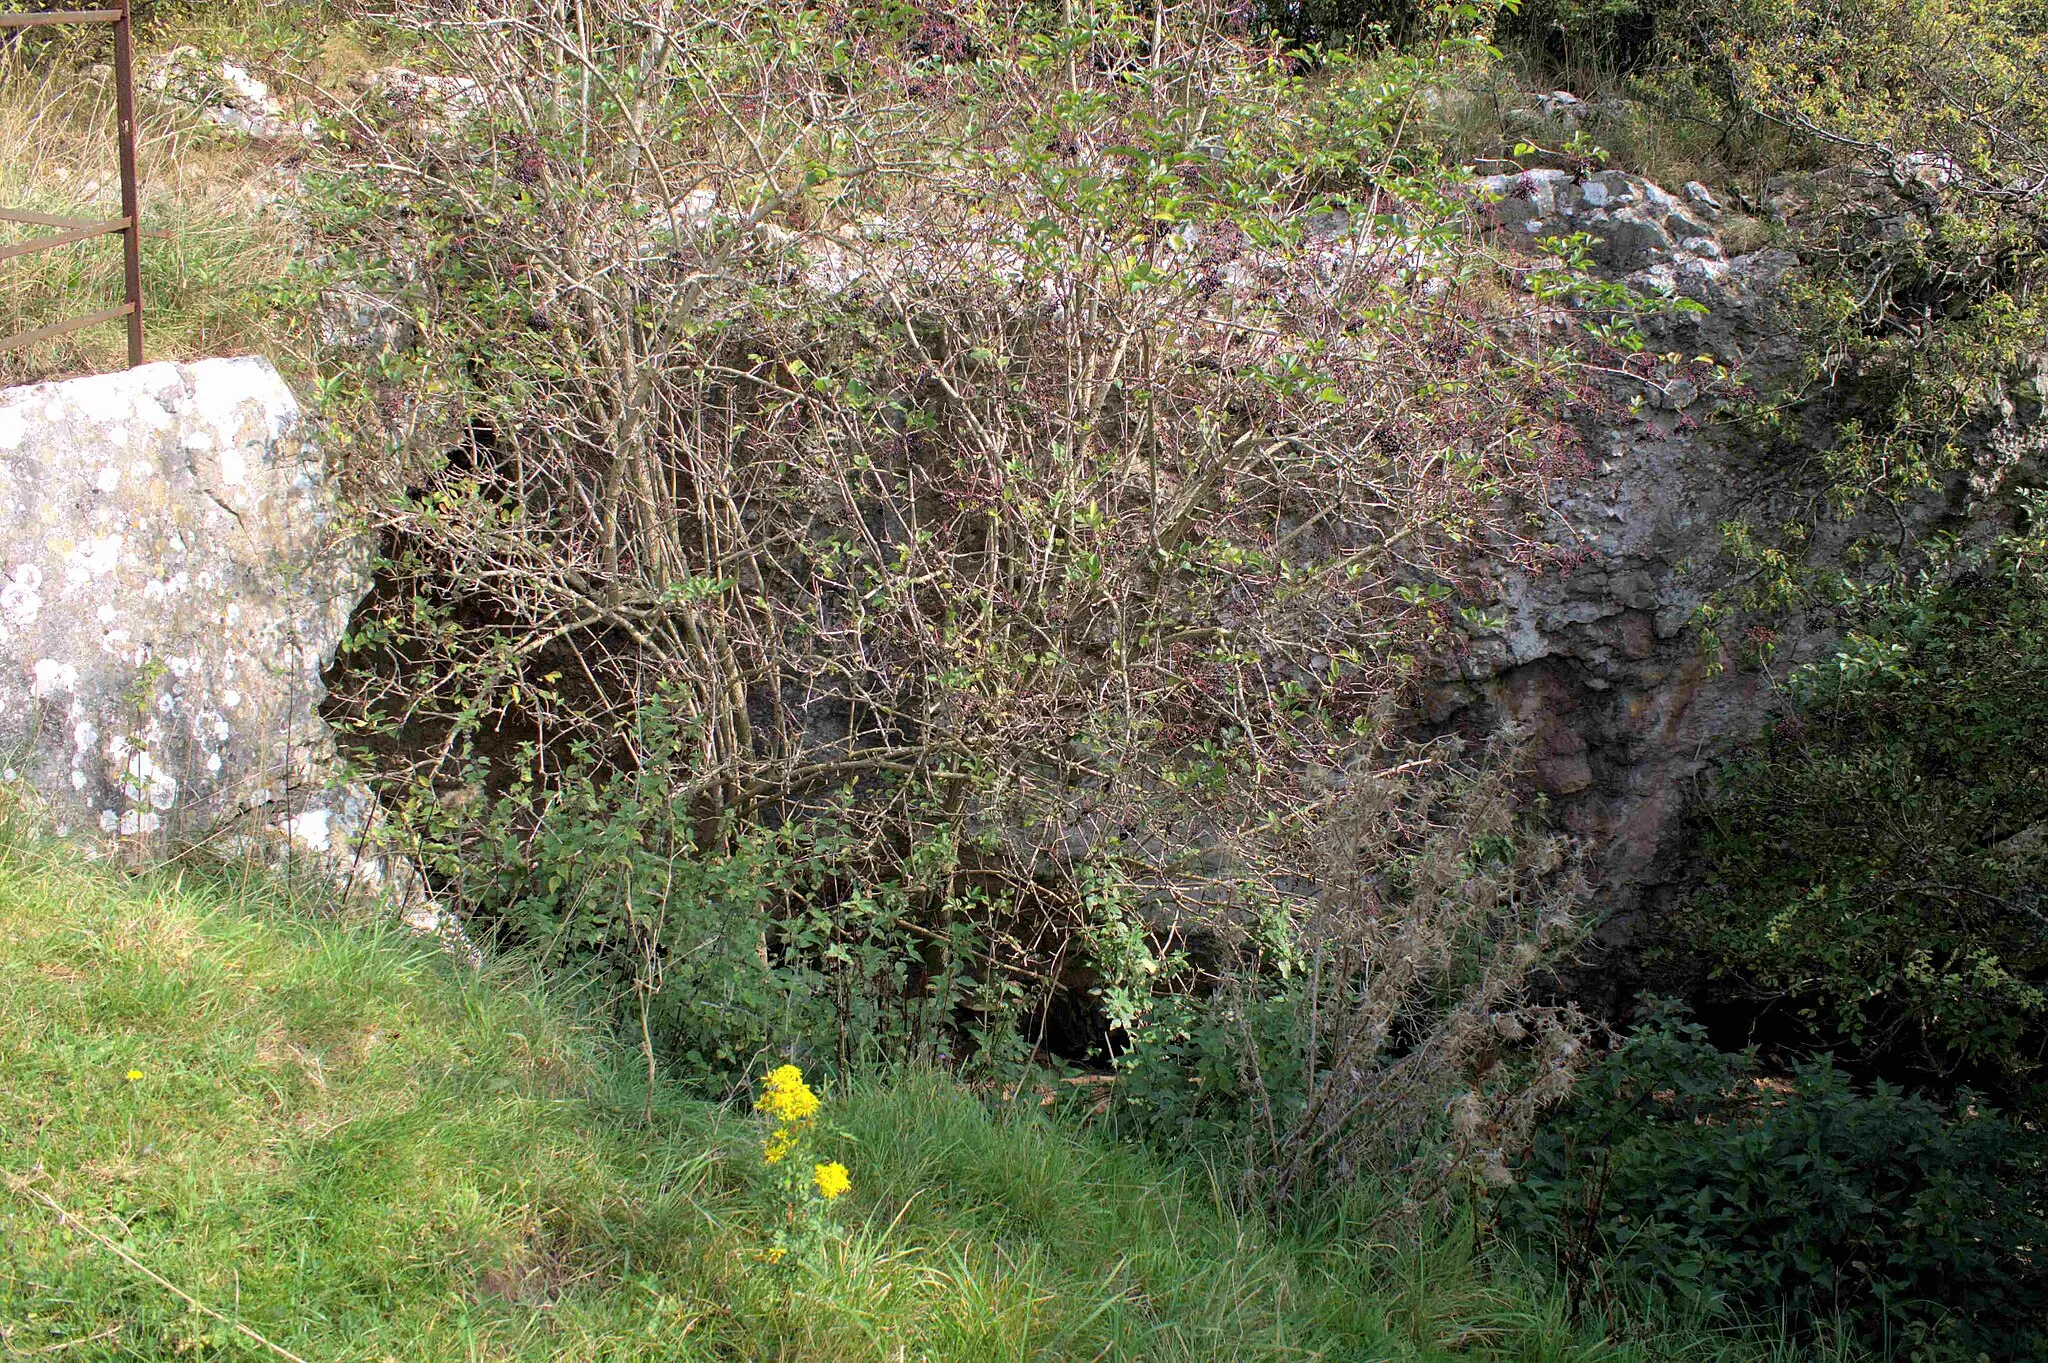 Photo showing: Cae Du Cave, which is situated around 6 meters to the west of Ogof Beuno. Animal bones from the Upper Paleolithic period were found here.
Grid Reference
SJ085085 (308544, 372430)
WGS84 Coordinates
53.2407, -3.37057
Nearest Postcode

LL17 0UR